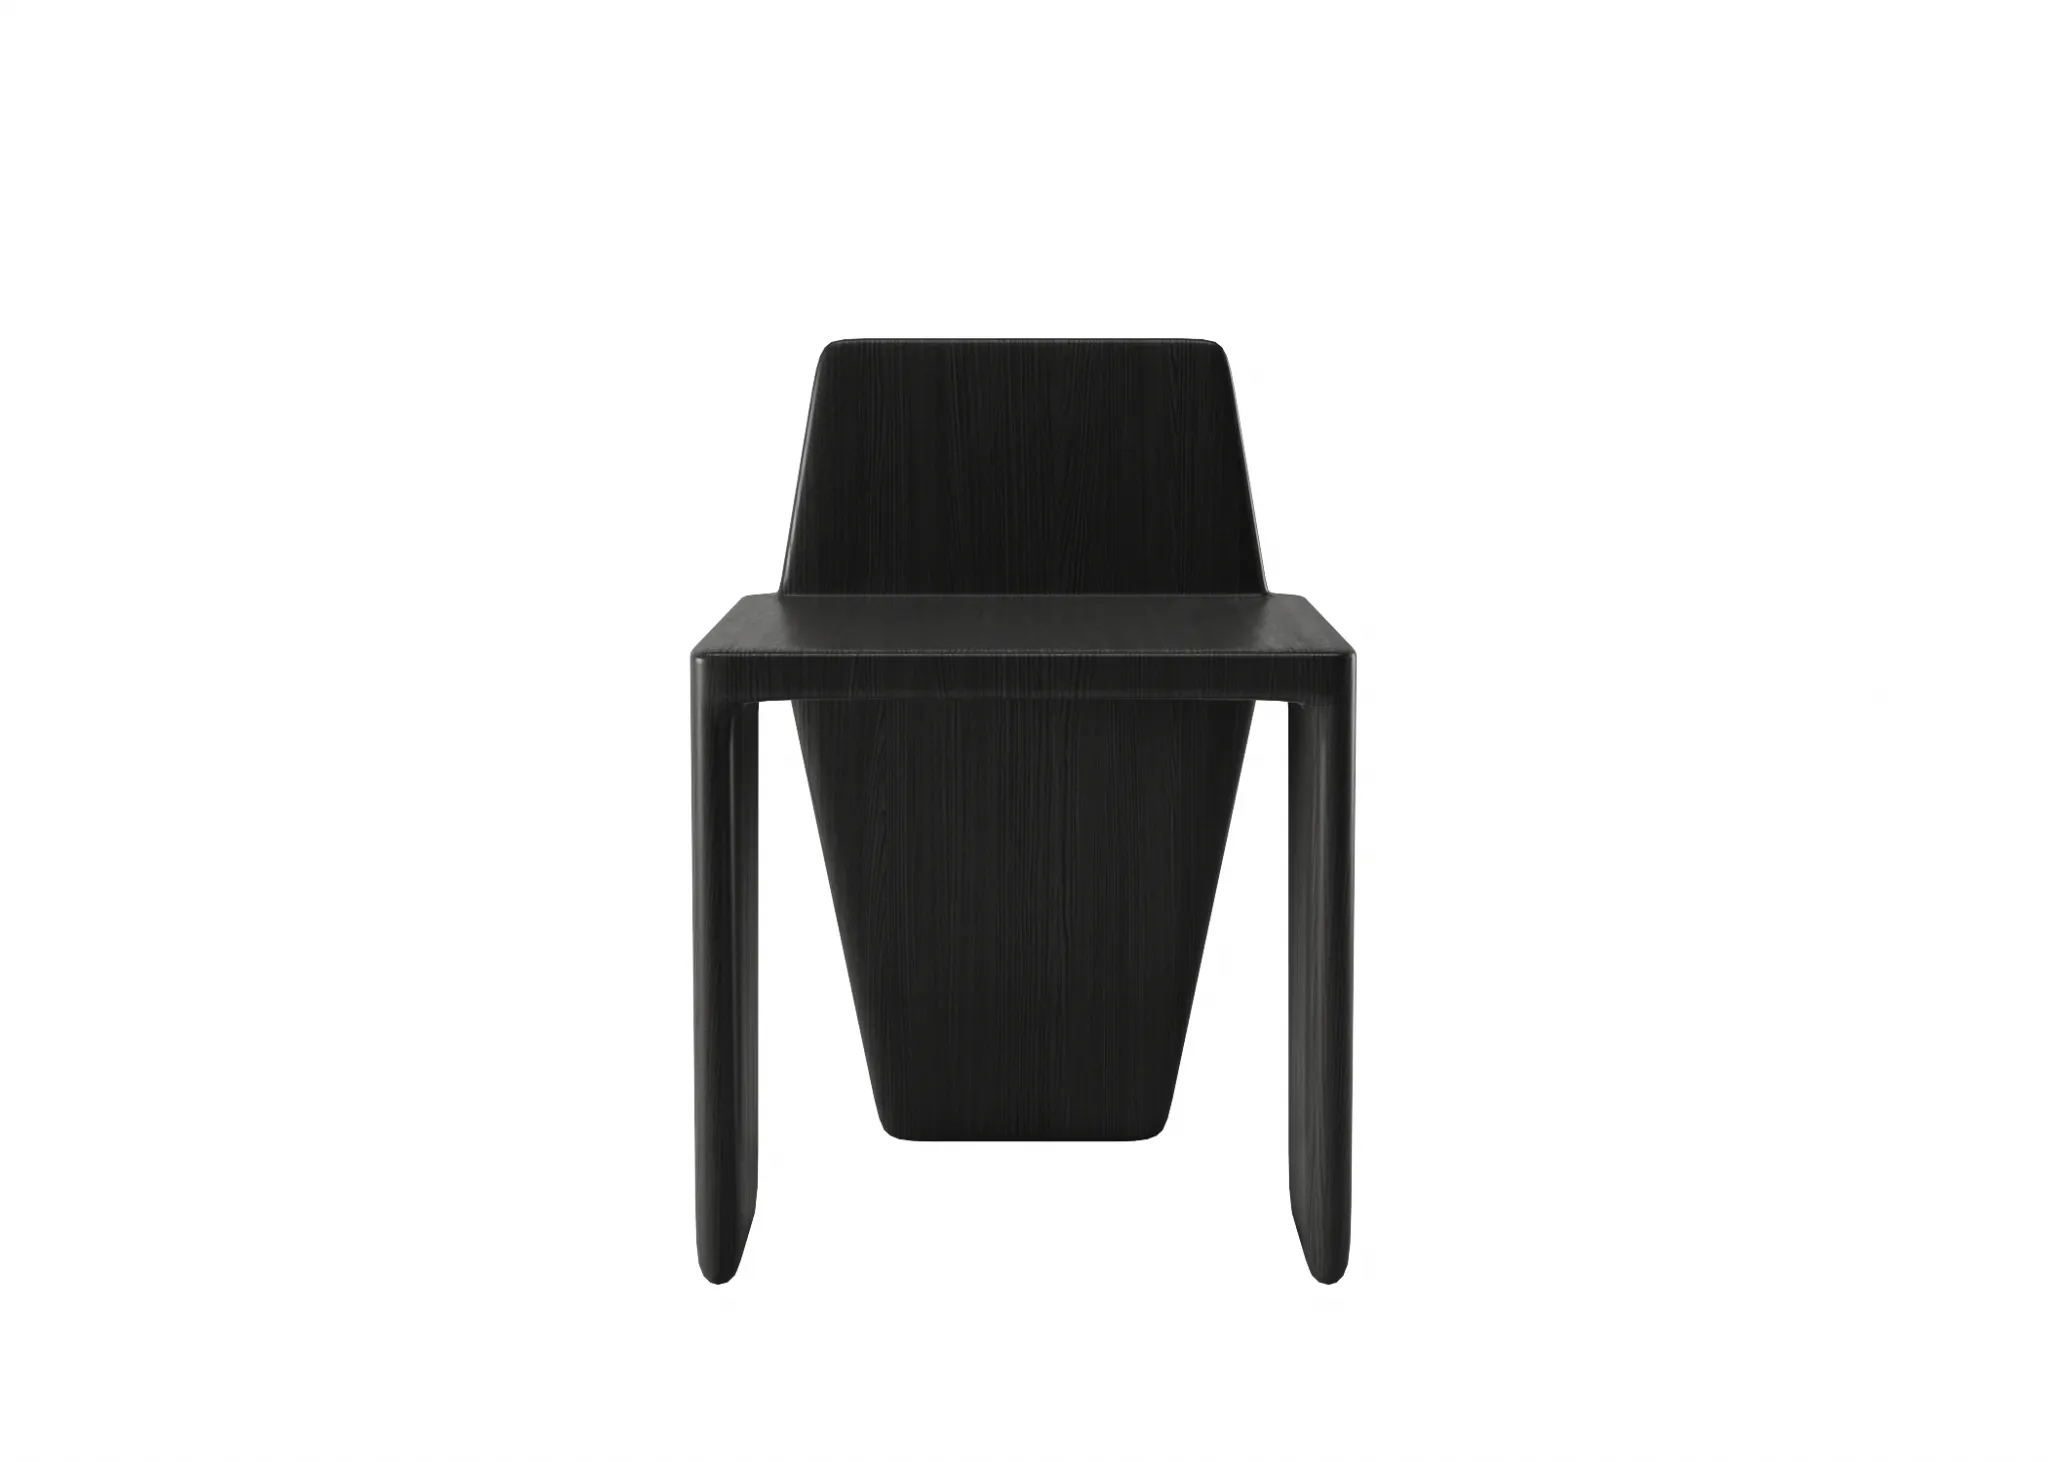 FURNITURE 3D MODELS – CHAIRS – 0373